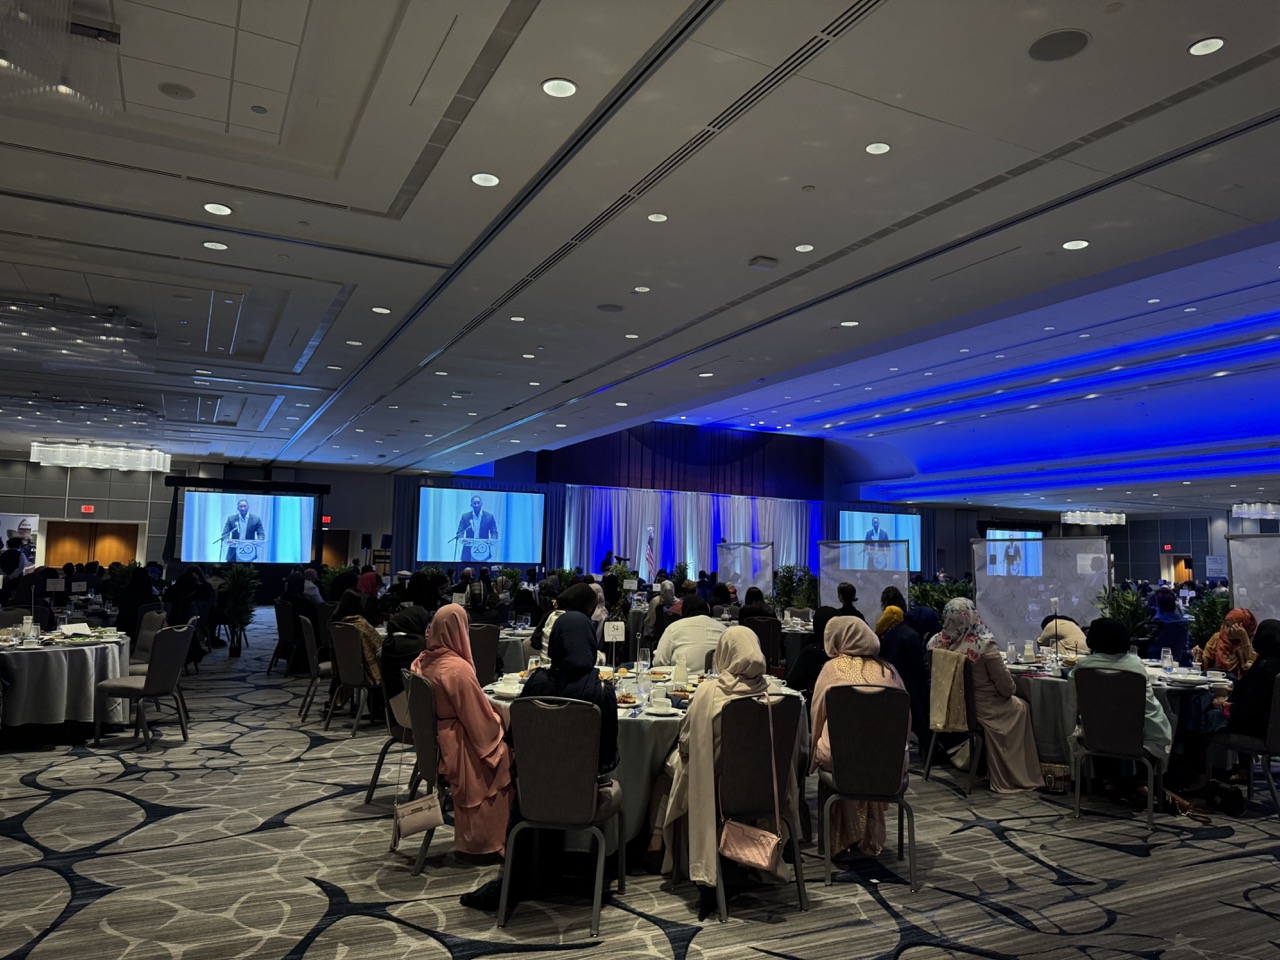 A view from the back of a large ballroom. Women in hijab sit at round dinner tables watching a speaker at the podium who is also projected onto digital screens.